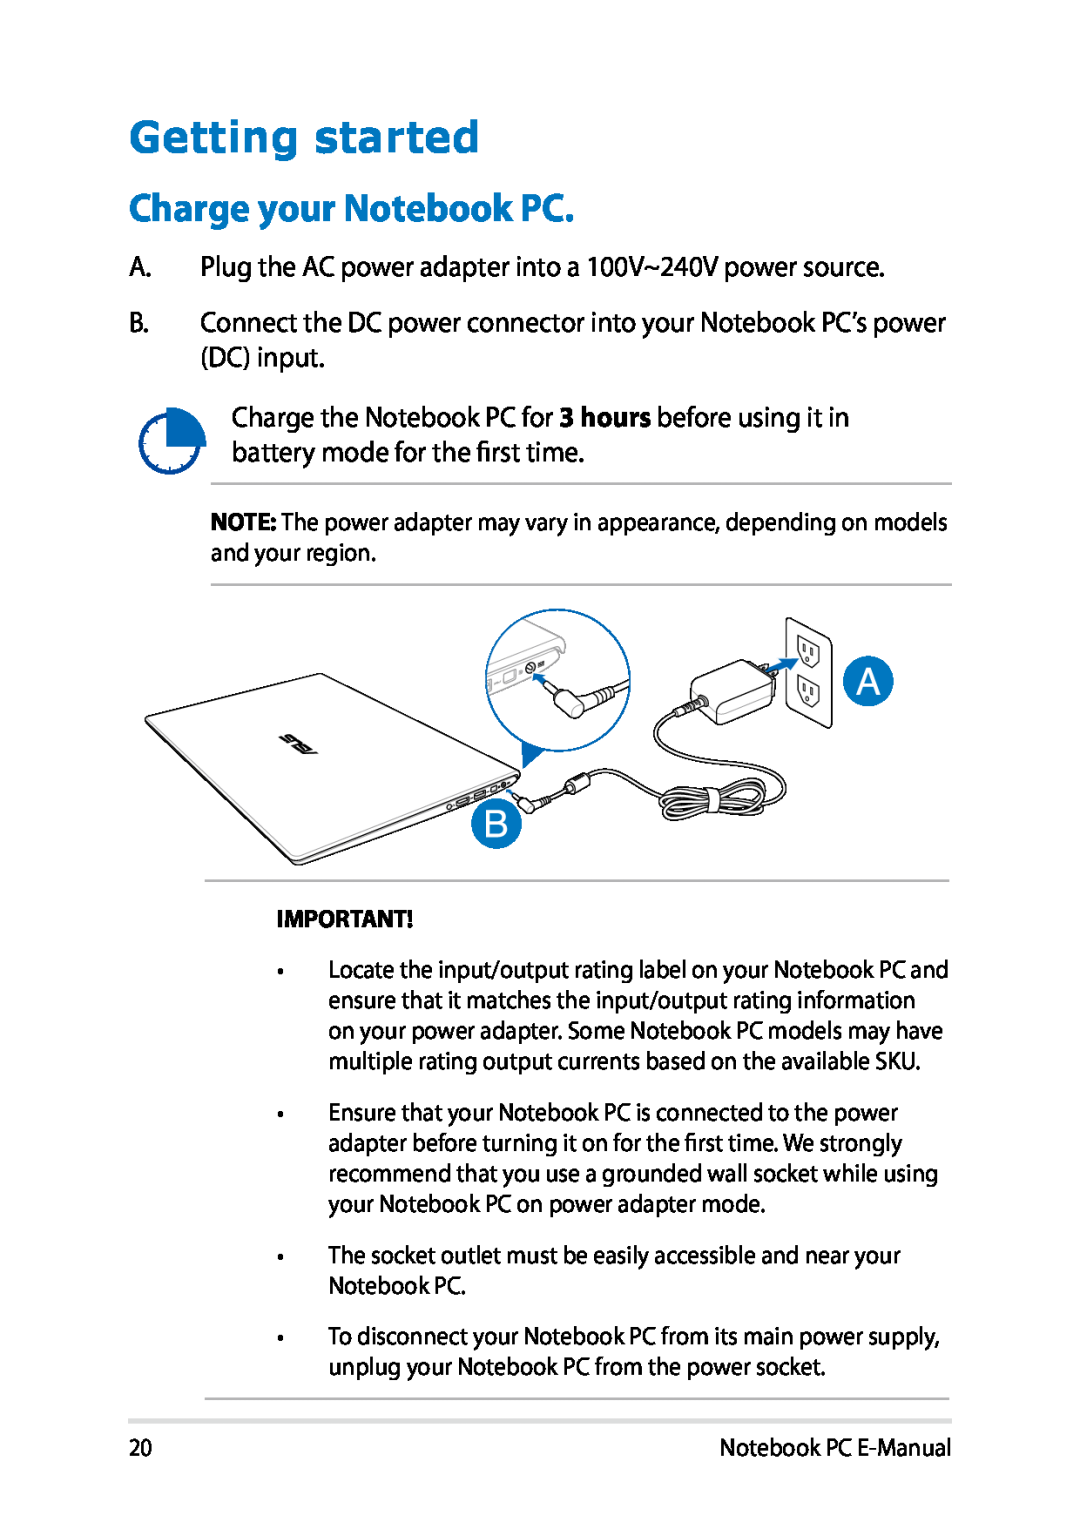 Asus E8438 manual Getting started, Charge your Notebook PC 